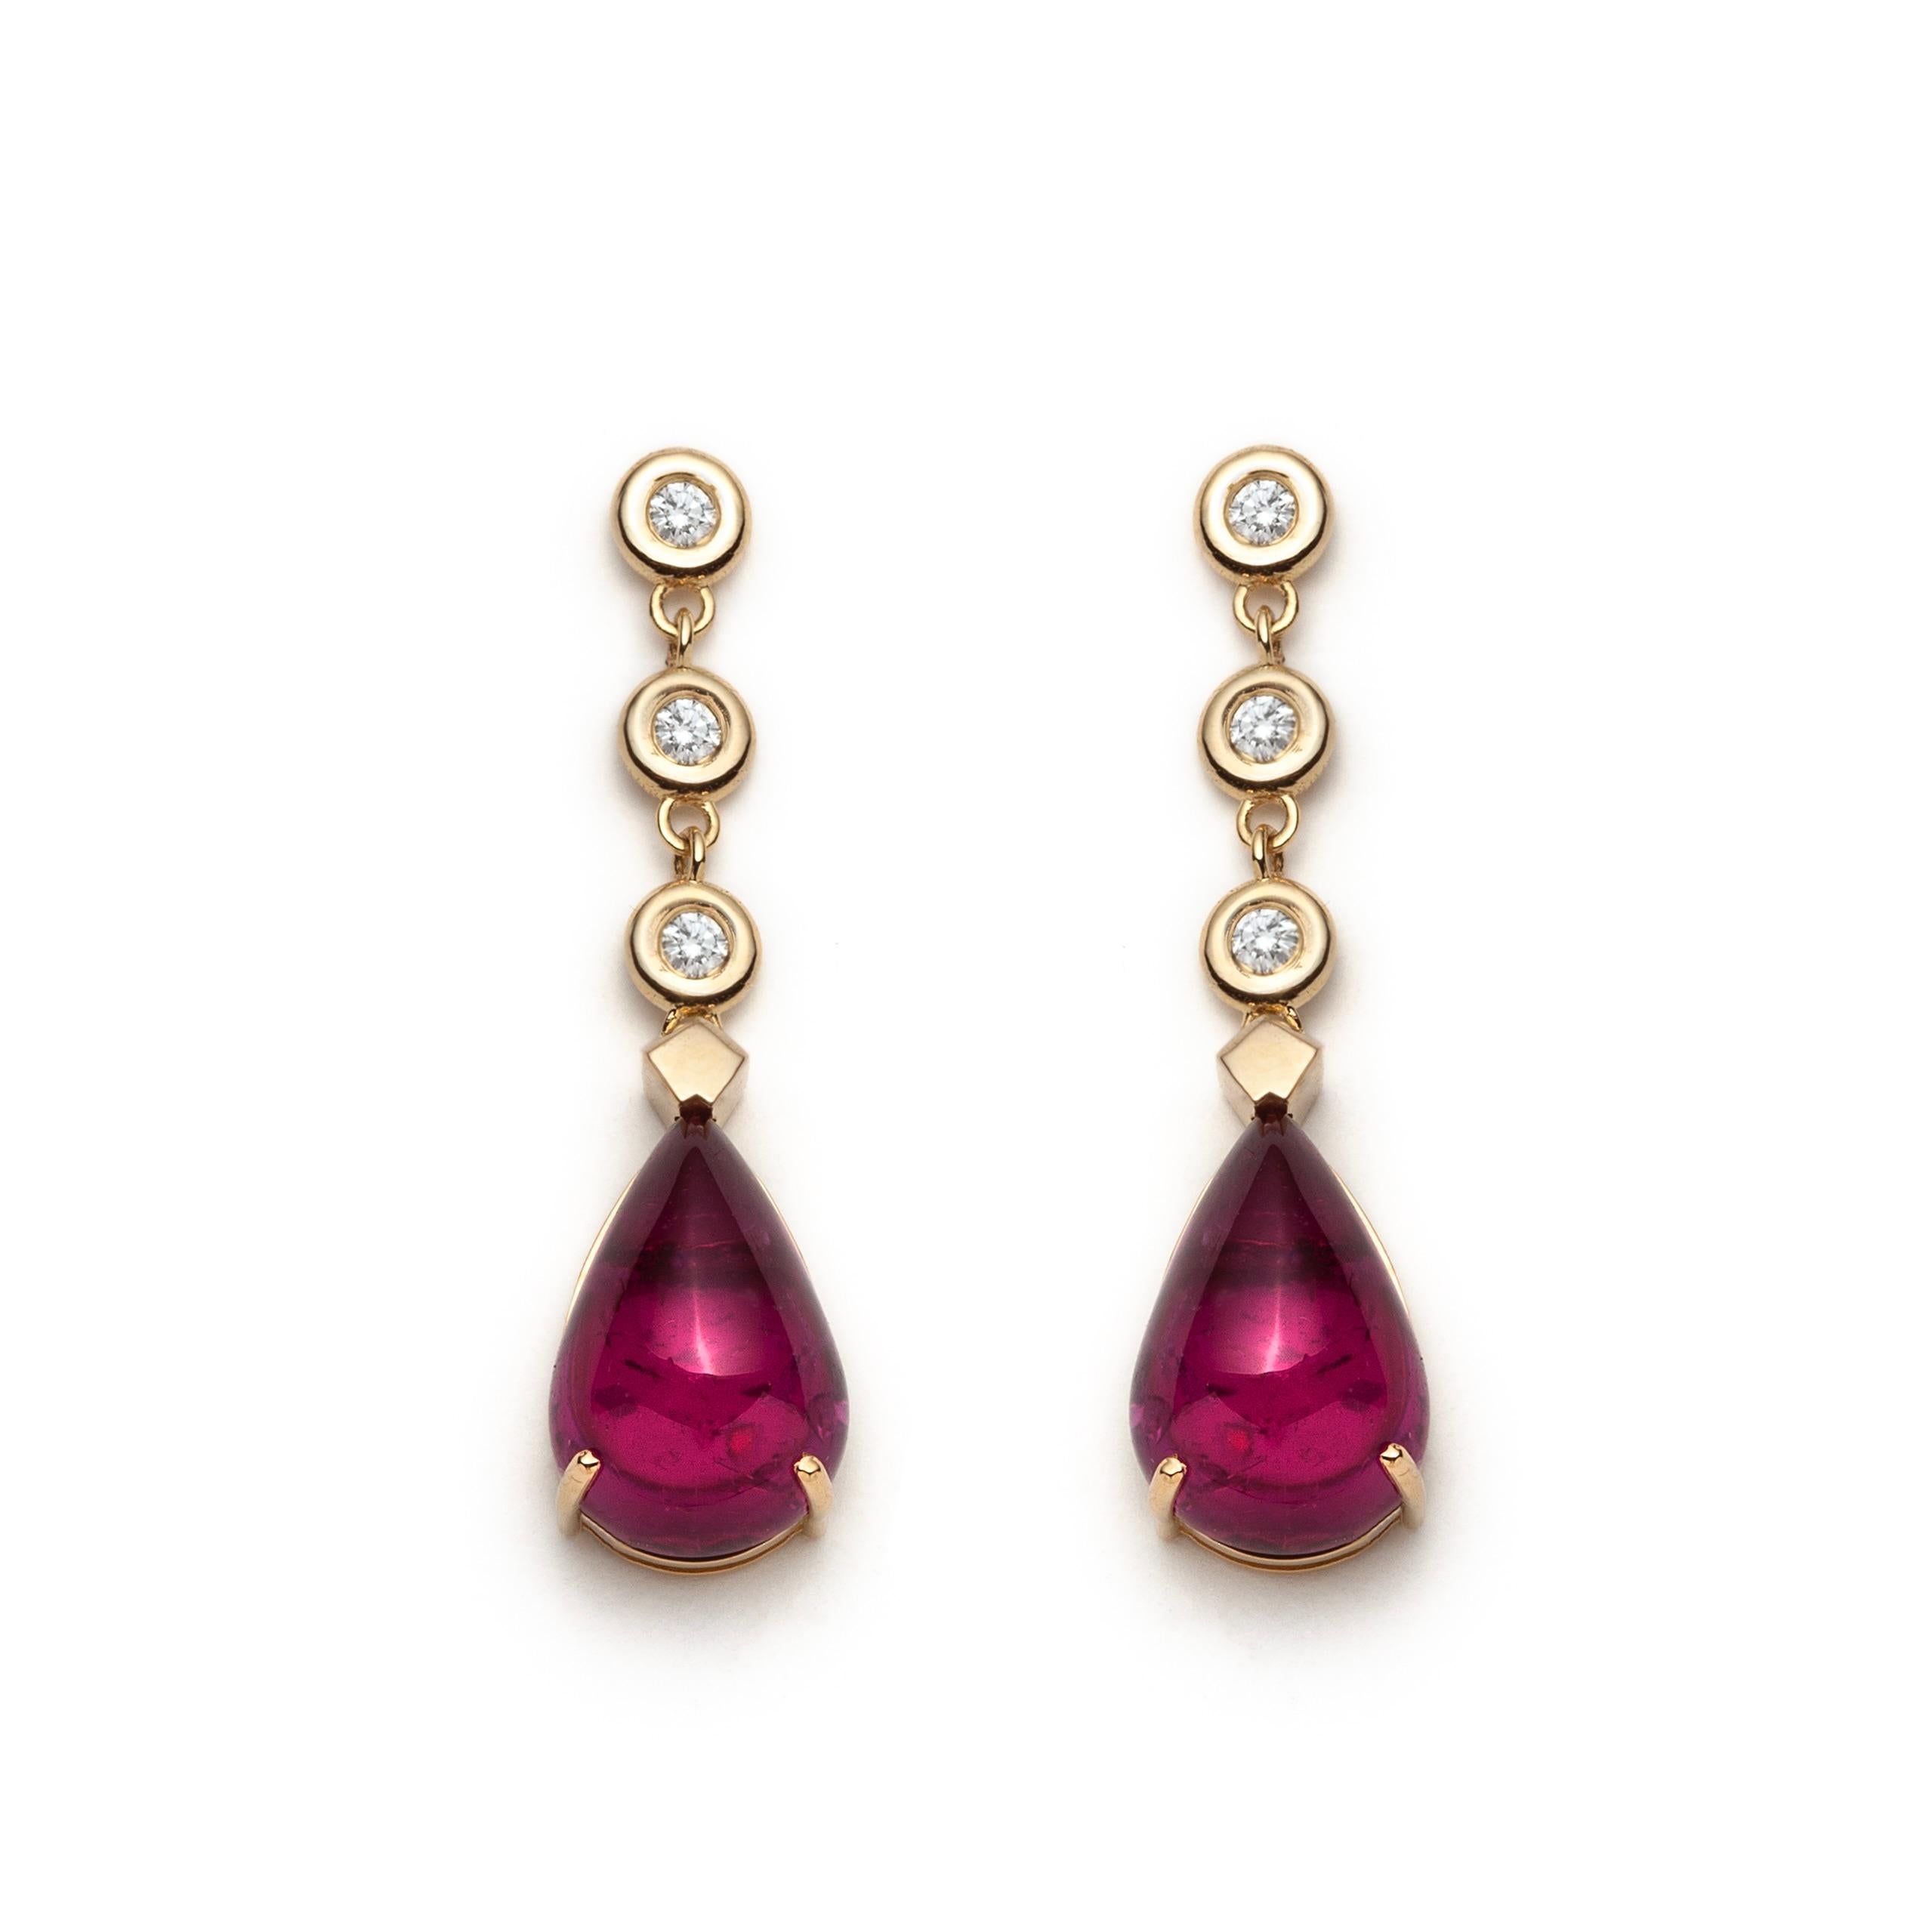 Freya Earrings In 18k Yellow Gold, Rubellite And Diamonds By Serafino

The Freya earrings feature teardrop rubellite (red tourmaline) cabochons set in 18k yellow gold enhanced by starry diamonds. They are held to the earlobe by a post and butterfly